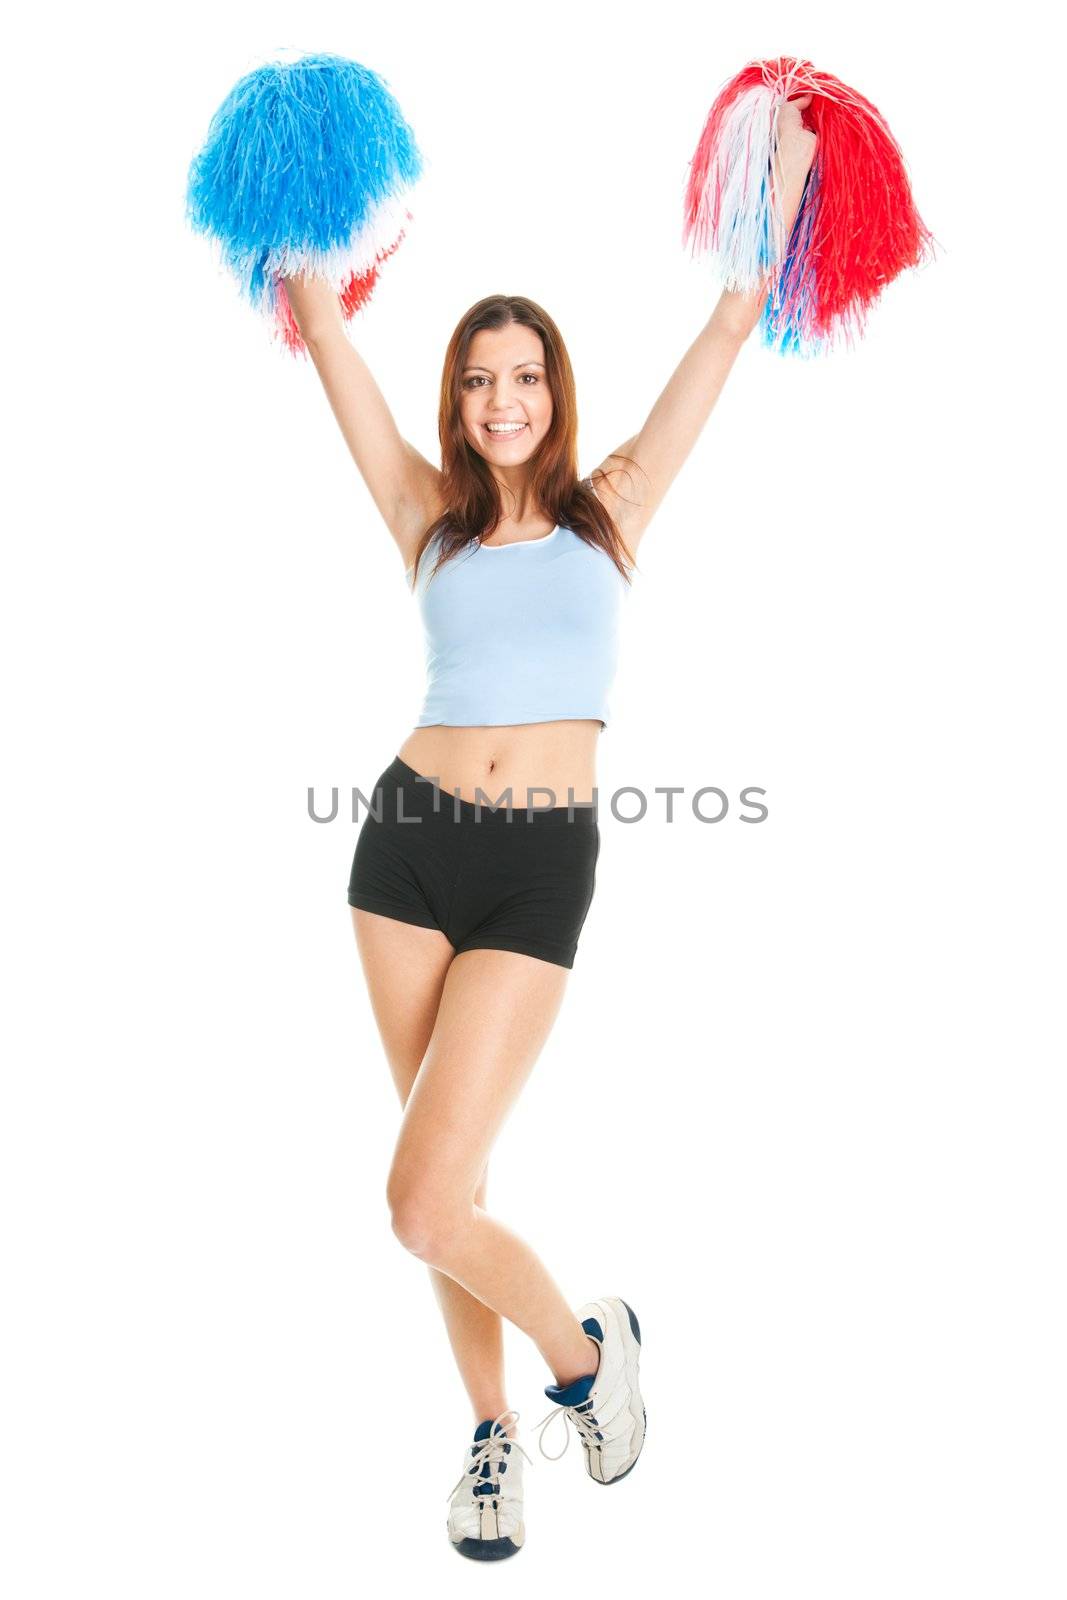 Smiling cheerleader girl posing with pom poms by AndreyPopov